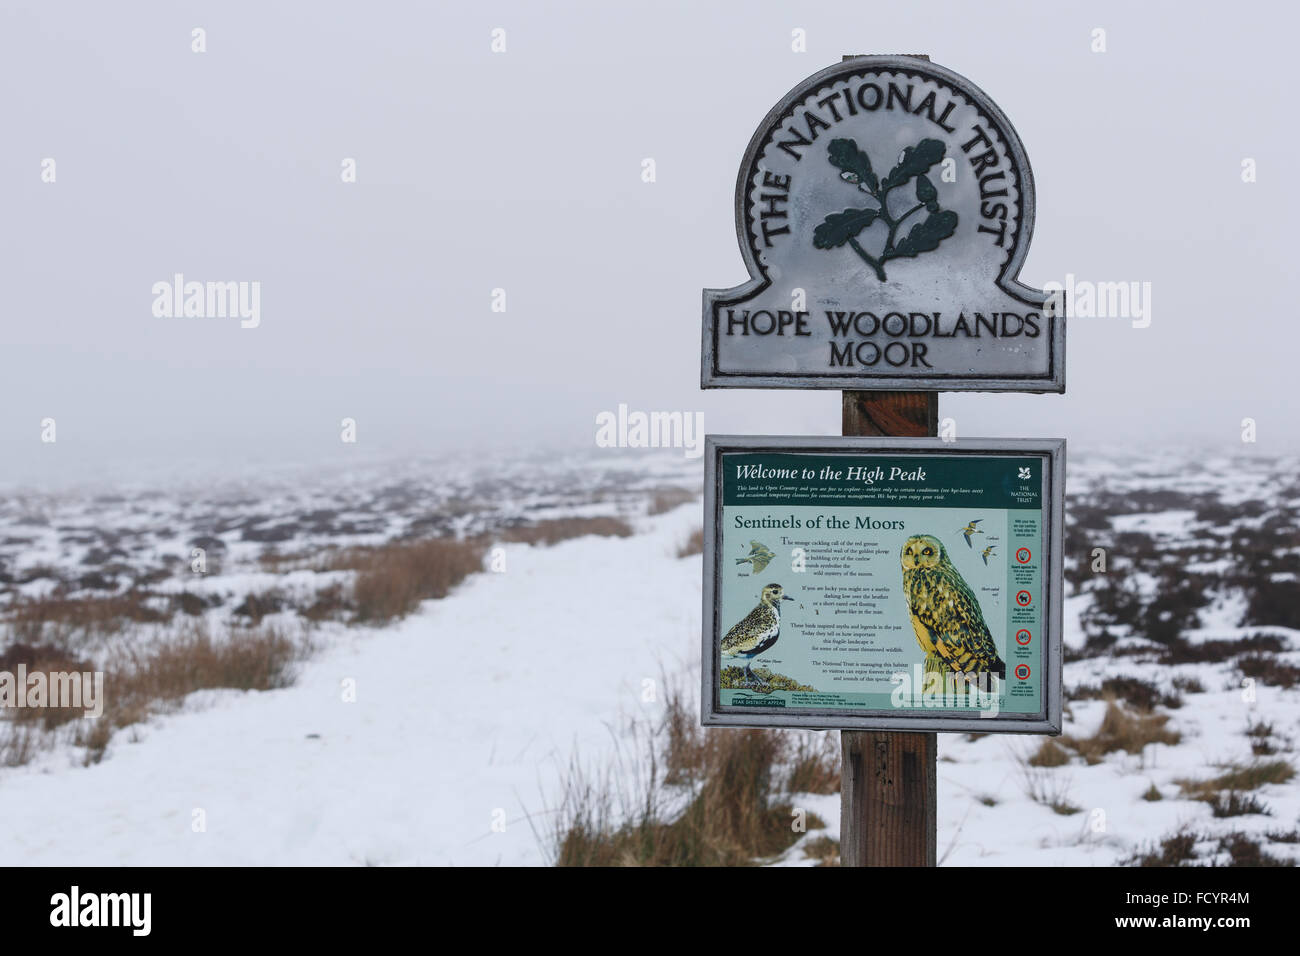 National Trust sign,  Bleaklow, along the A57 Snake Pass road, in January. Derbyshire (Peak District) Stock Photo